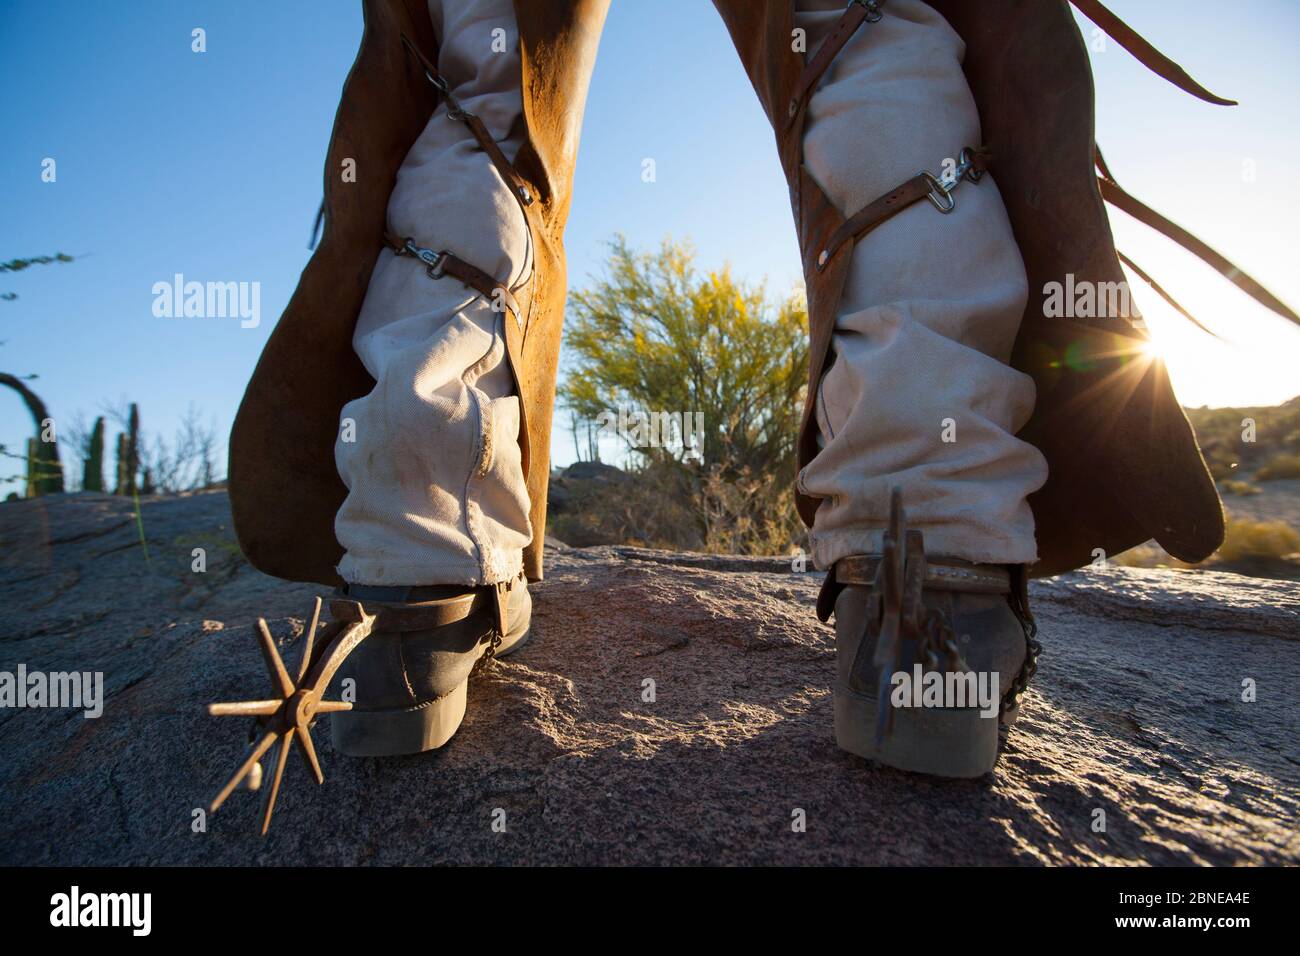 Cowboy's legs wearing chaps over trousers to protect himself from the spiny desert, Vizcaino Desert, Baja California, Mexico, May 2008. Stock Photo